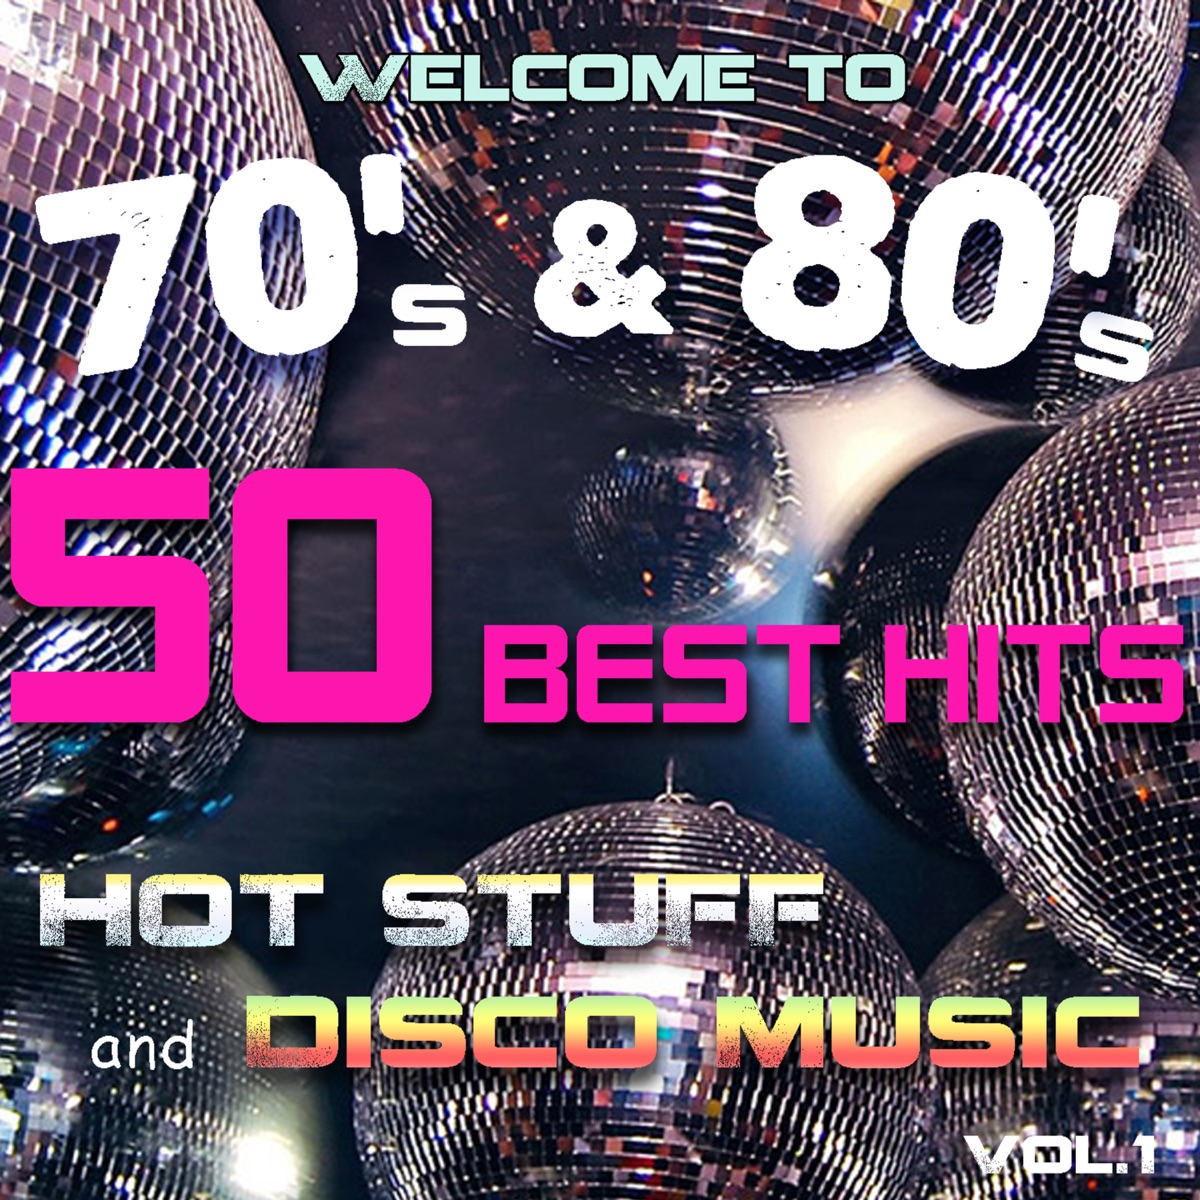 Welcome to 70's & 80's: 50 Best Hits, Hot Stuff, And Disco Music - Vol.1 -  Album by James Alleman & Le Freak - Apple Music